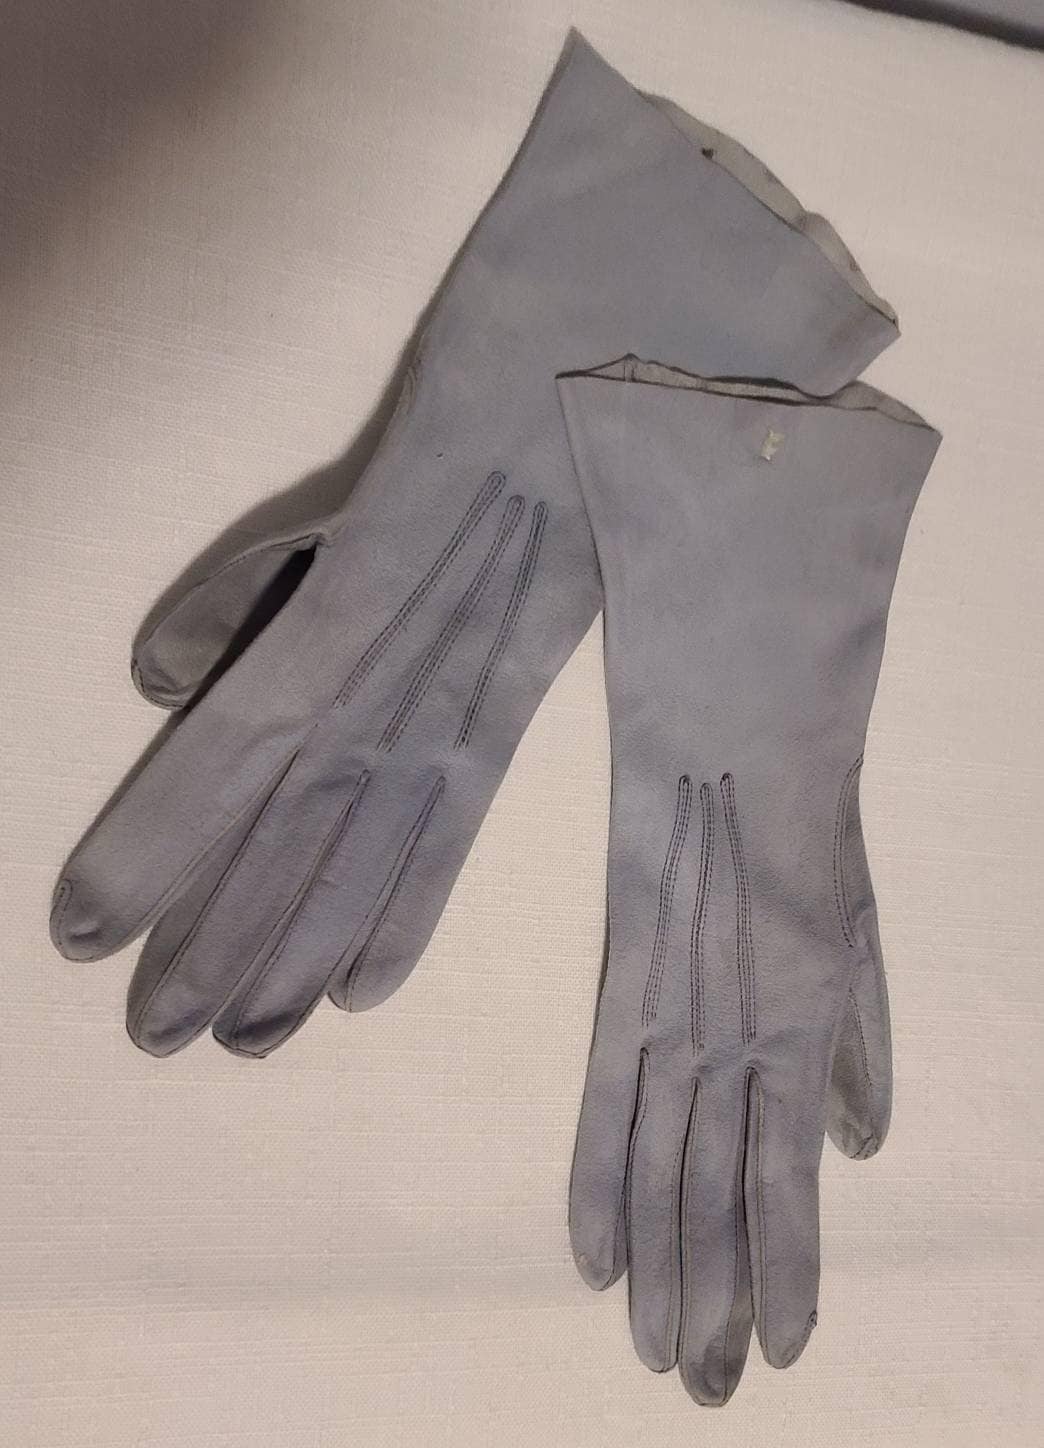 Vintage Suede Gloves Thin 1950s Periwinkle Light Blue Suede Gloves Rockabilly a few flaws